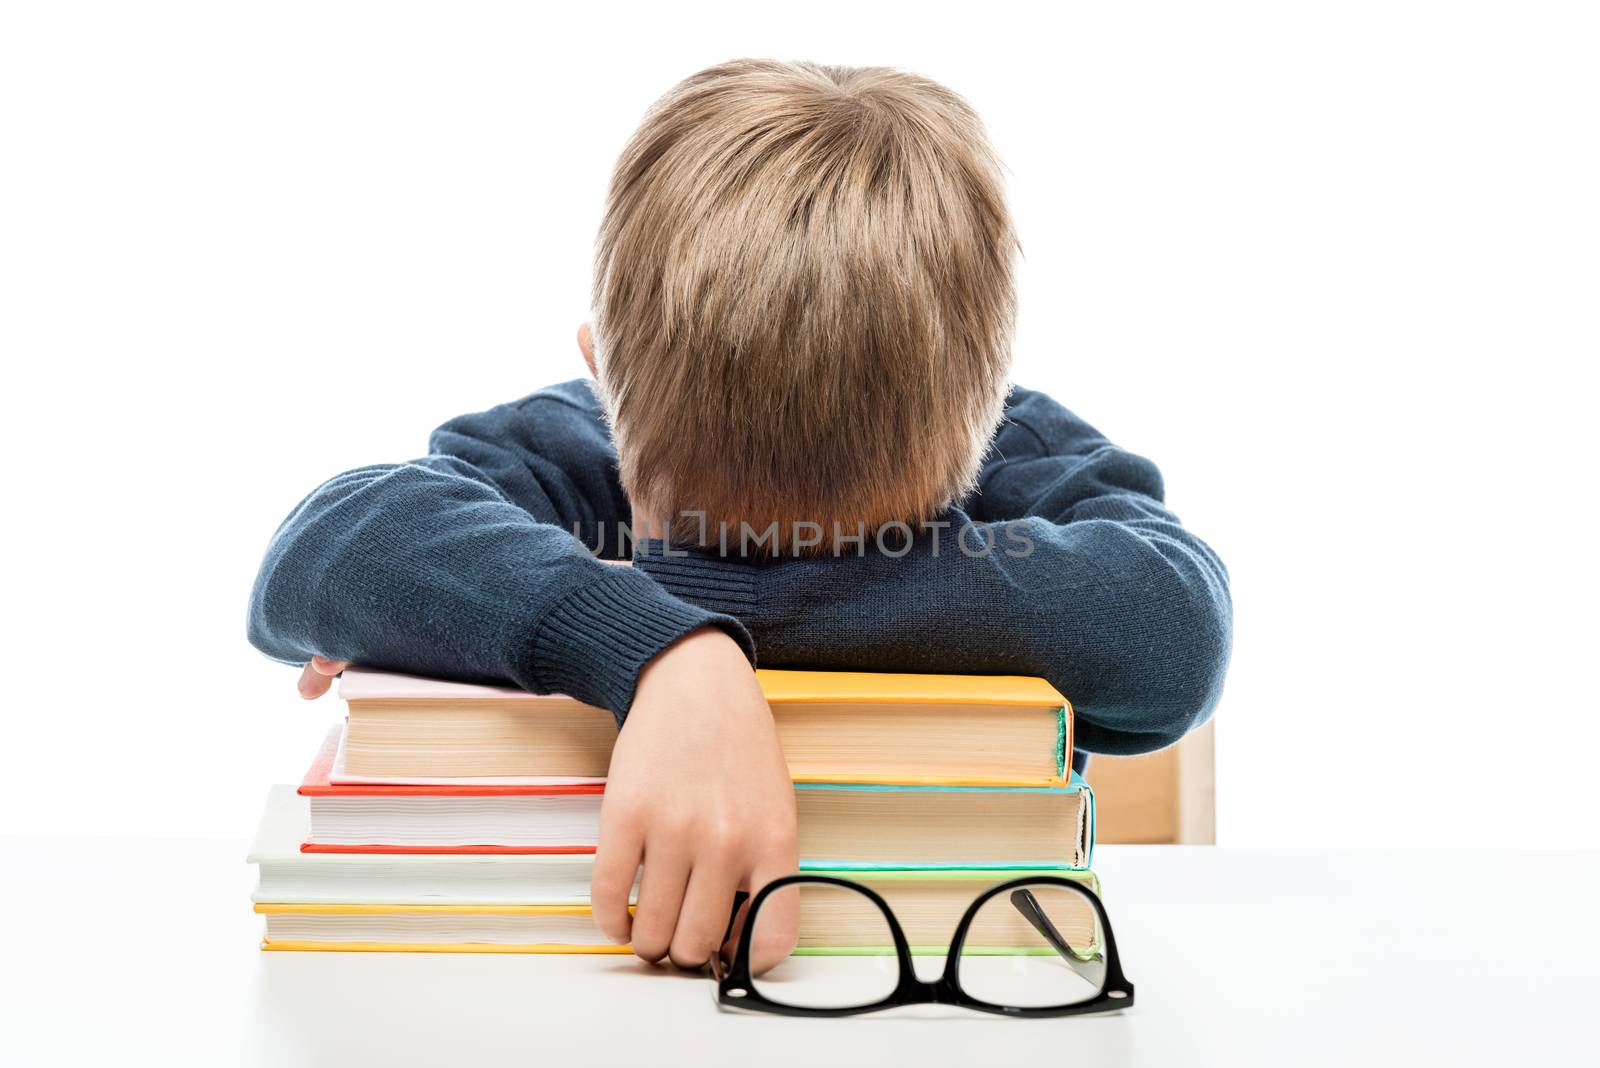 a tired little schoolboy fell asleep on books during a lesson